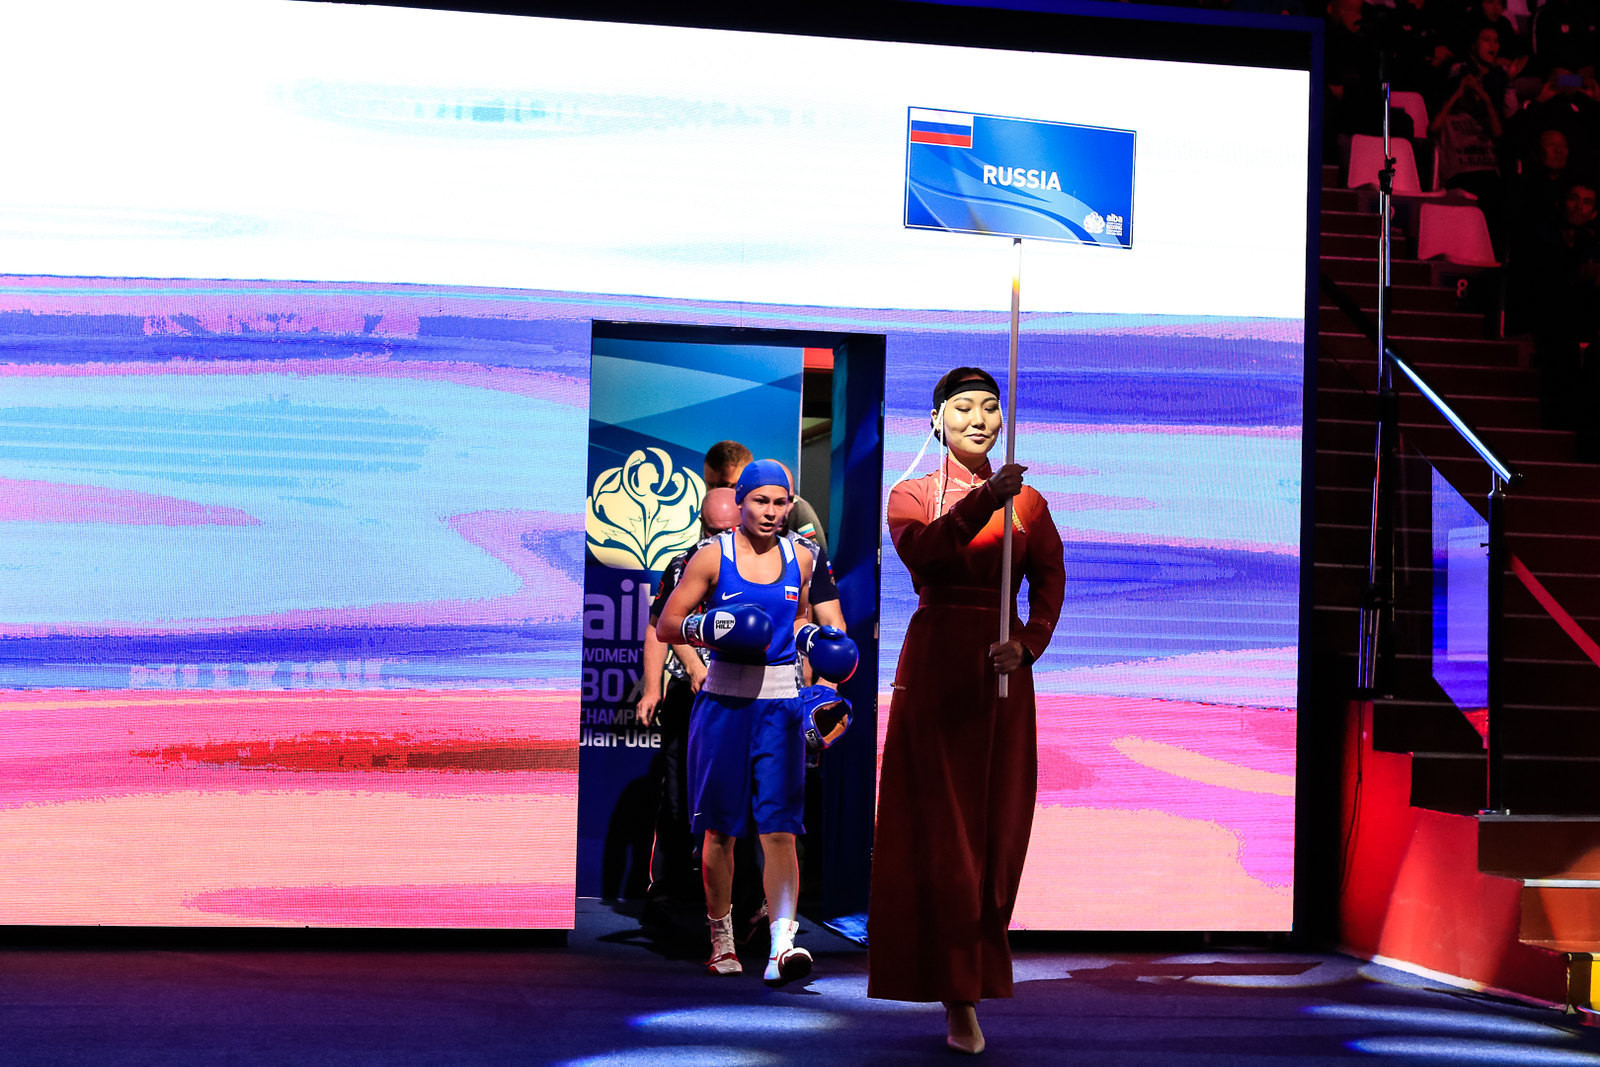 Ulan-Ude in Russia hosted the last Women's World Boxing Championships in 2019 ©AIBA